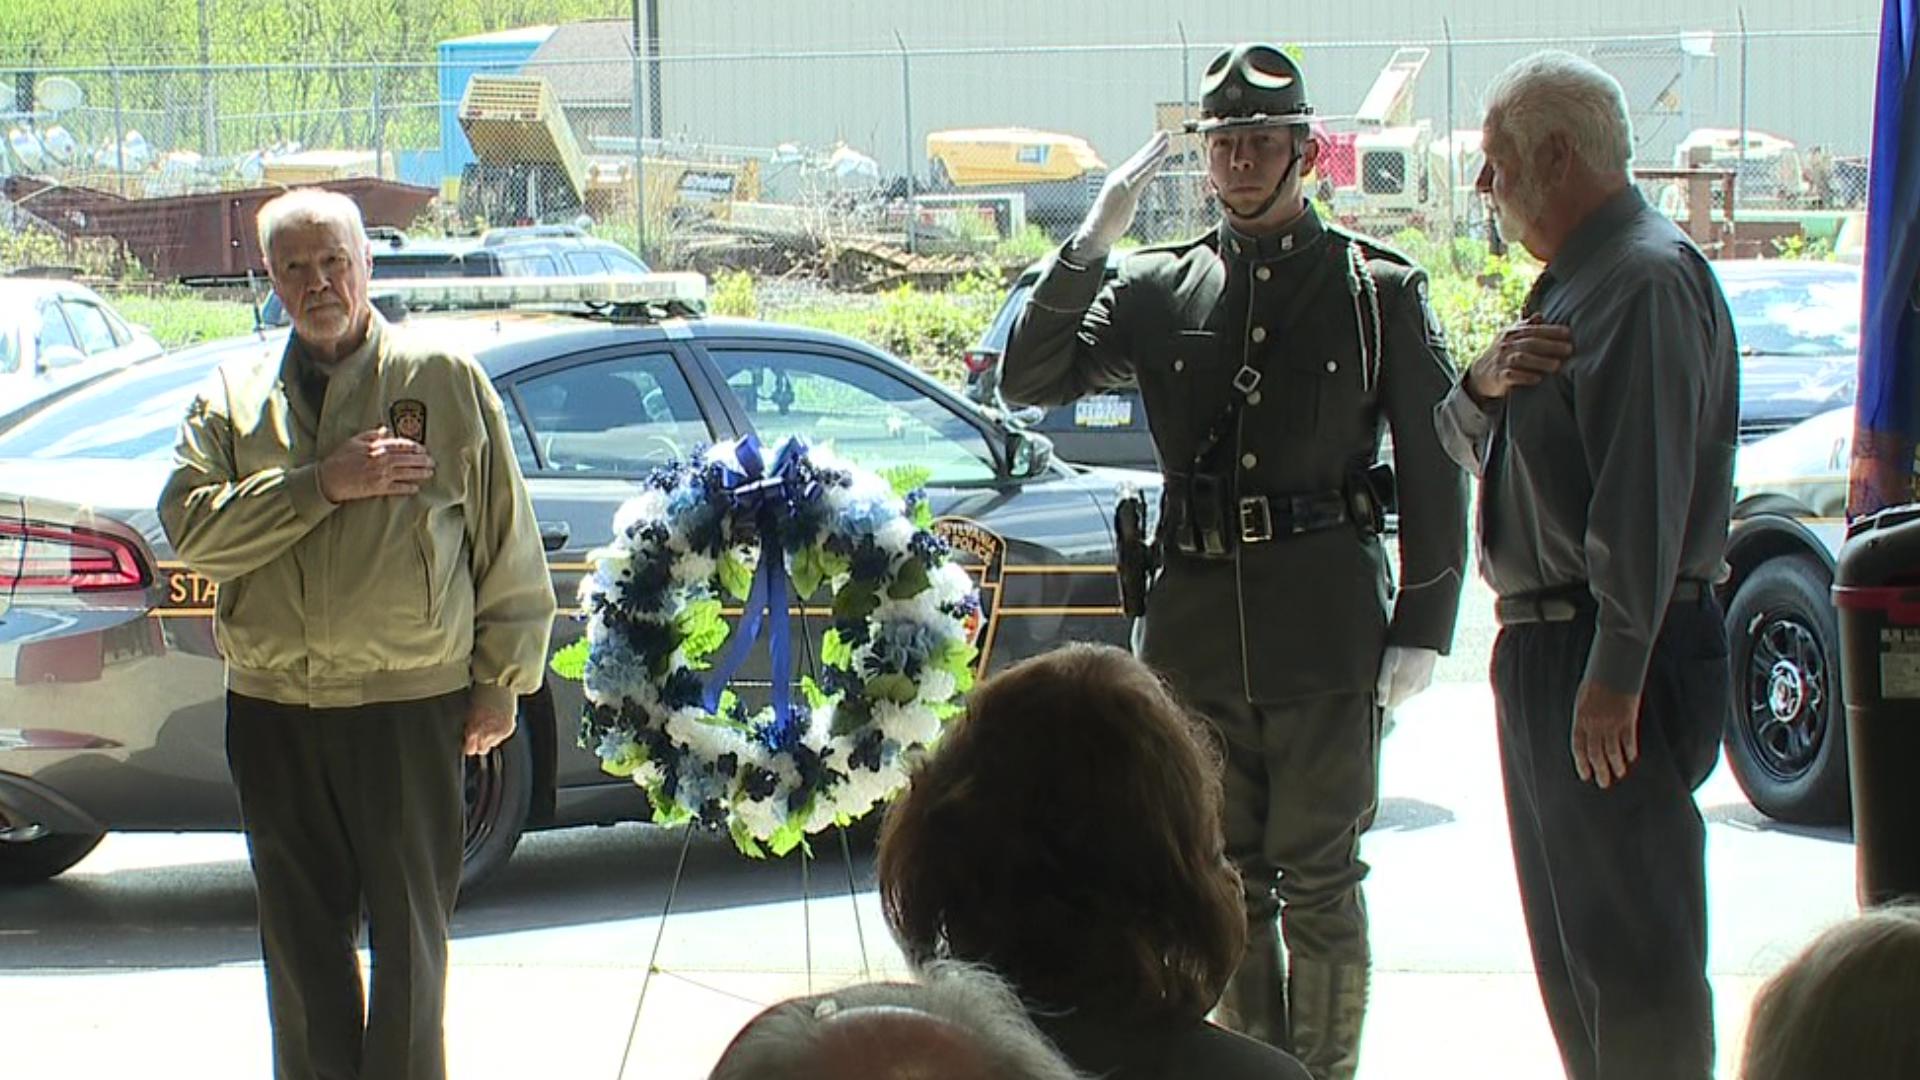 The annual ceremony honors all troopers who have died since the PSP was founded on May 2, 1905.